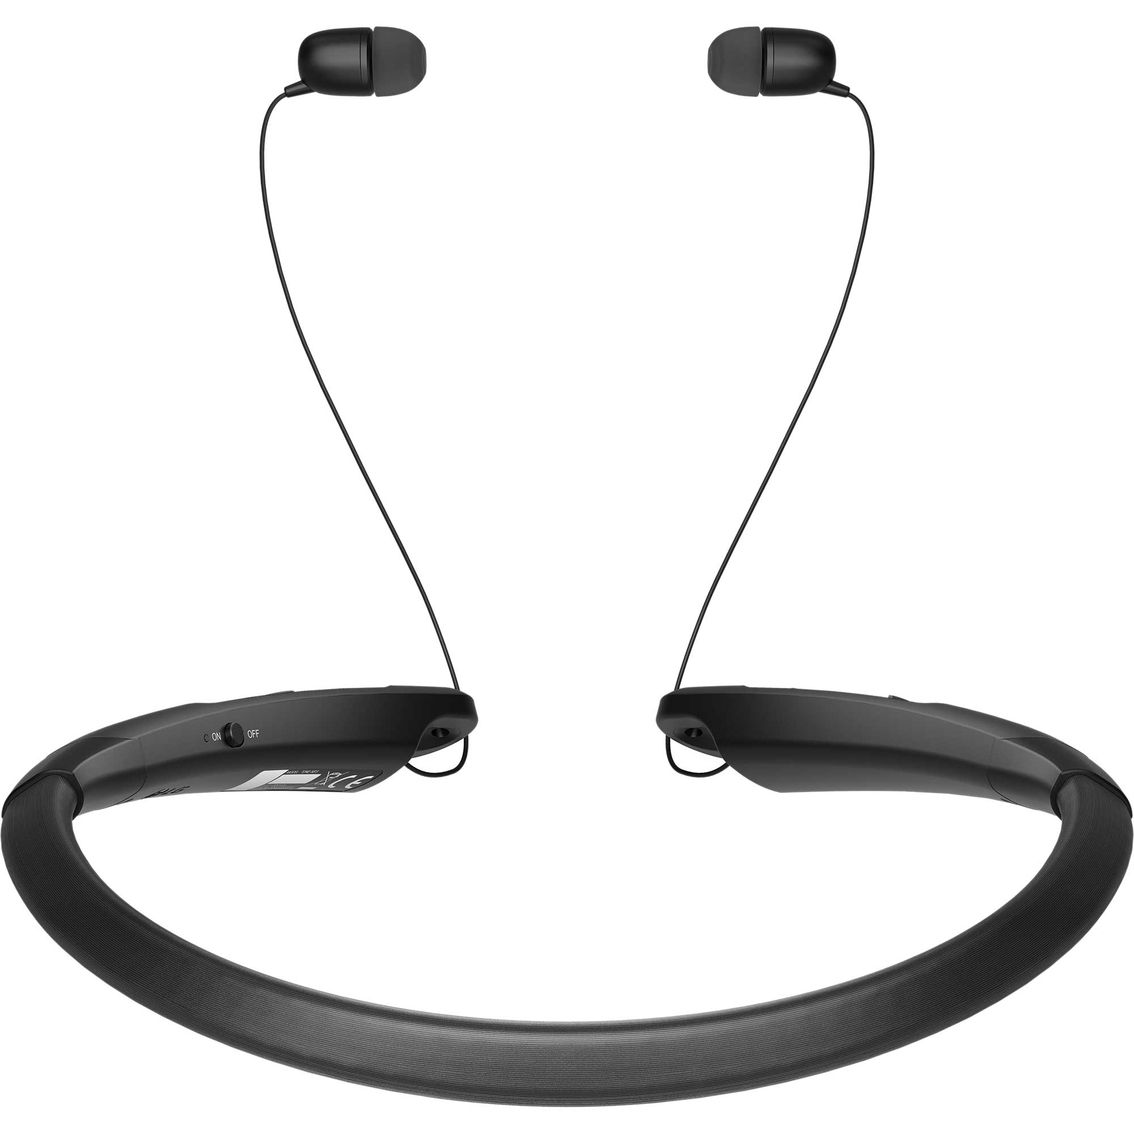 LG TONE NP3 Wireless Stereo Headset - Image 3 of 4